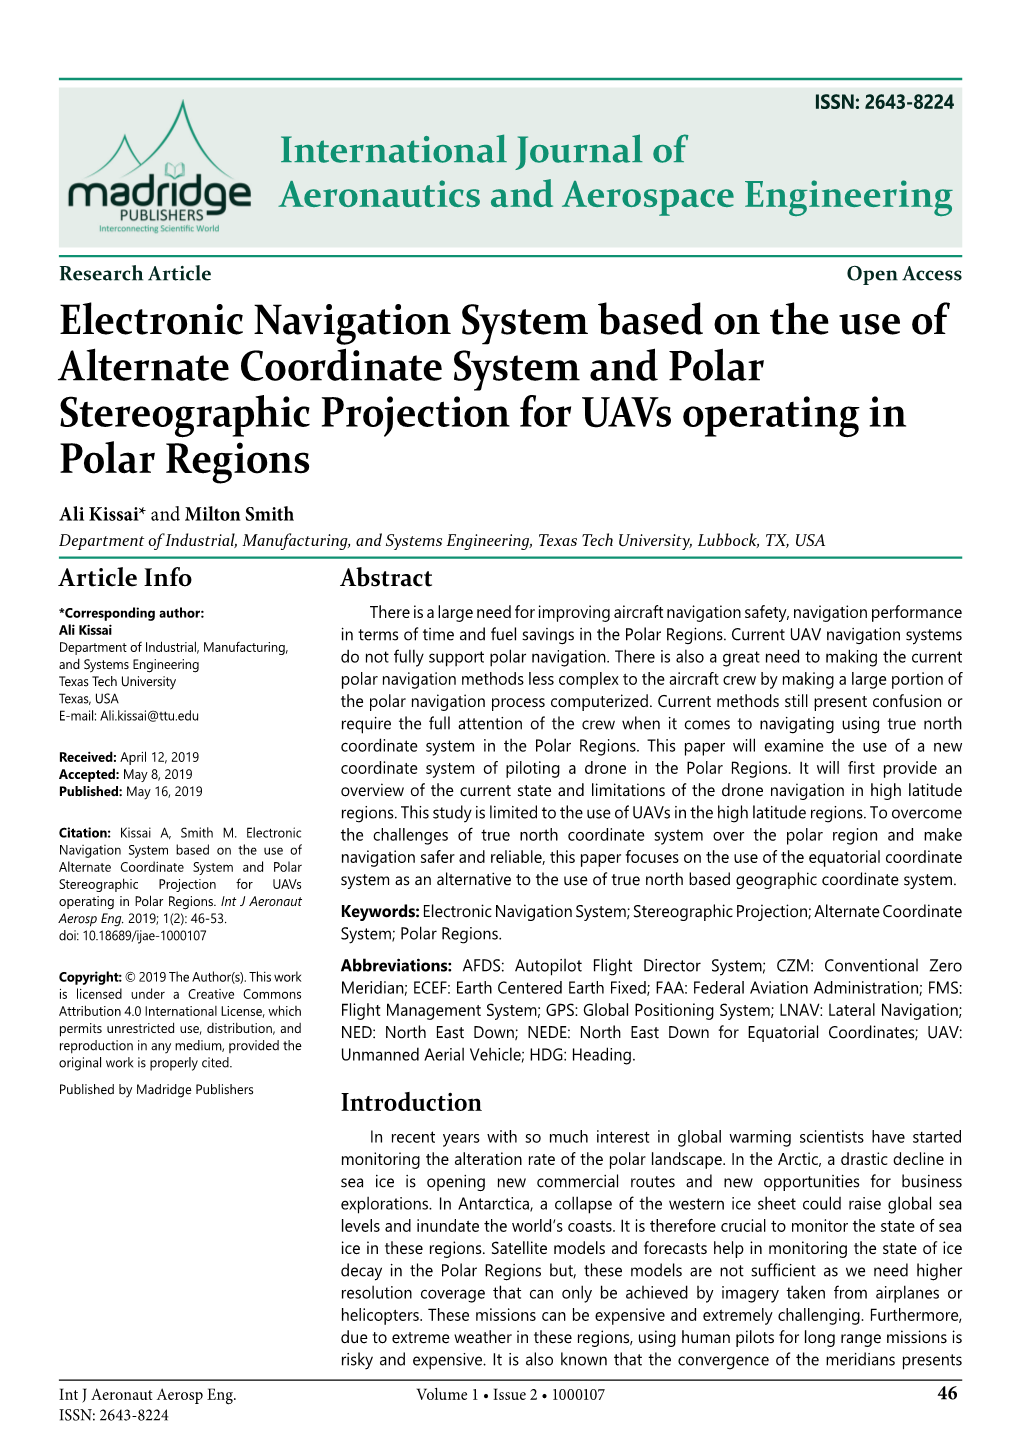 Electronic Navigation System Based on the Use of Alternate Coordinate System and Polar Stereographic Projection for Uavs Operating in Polar Regions